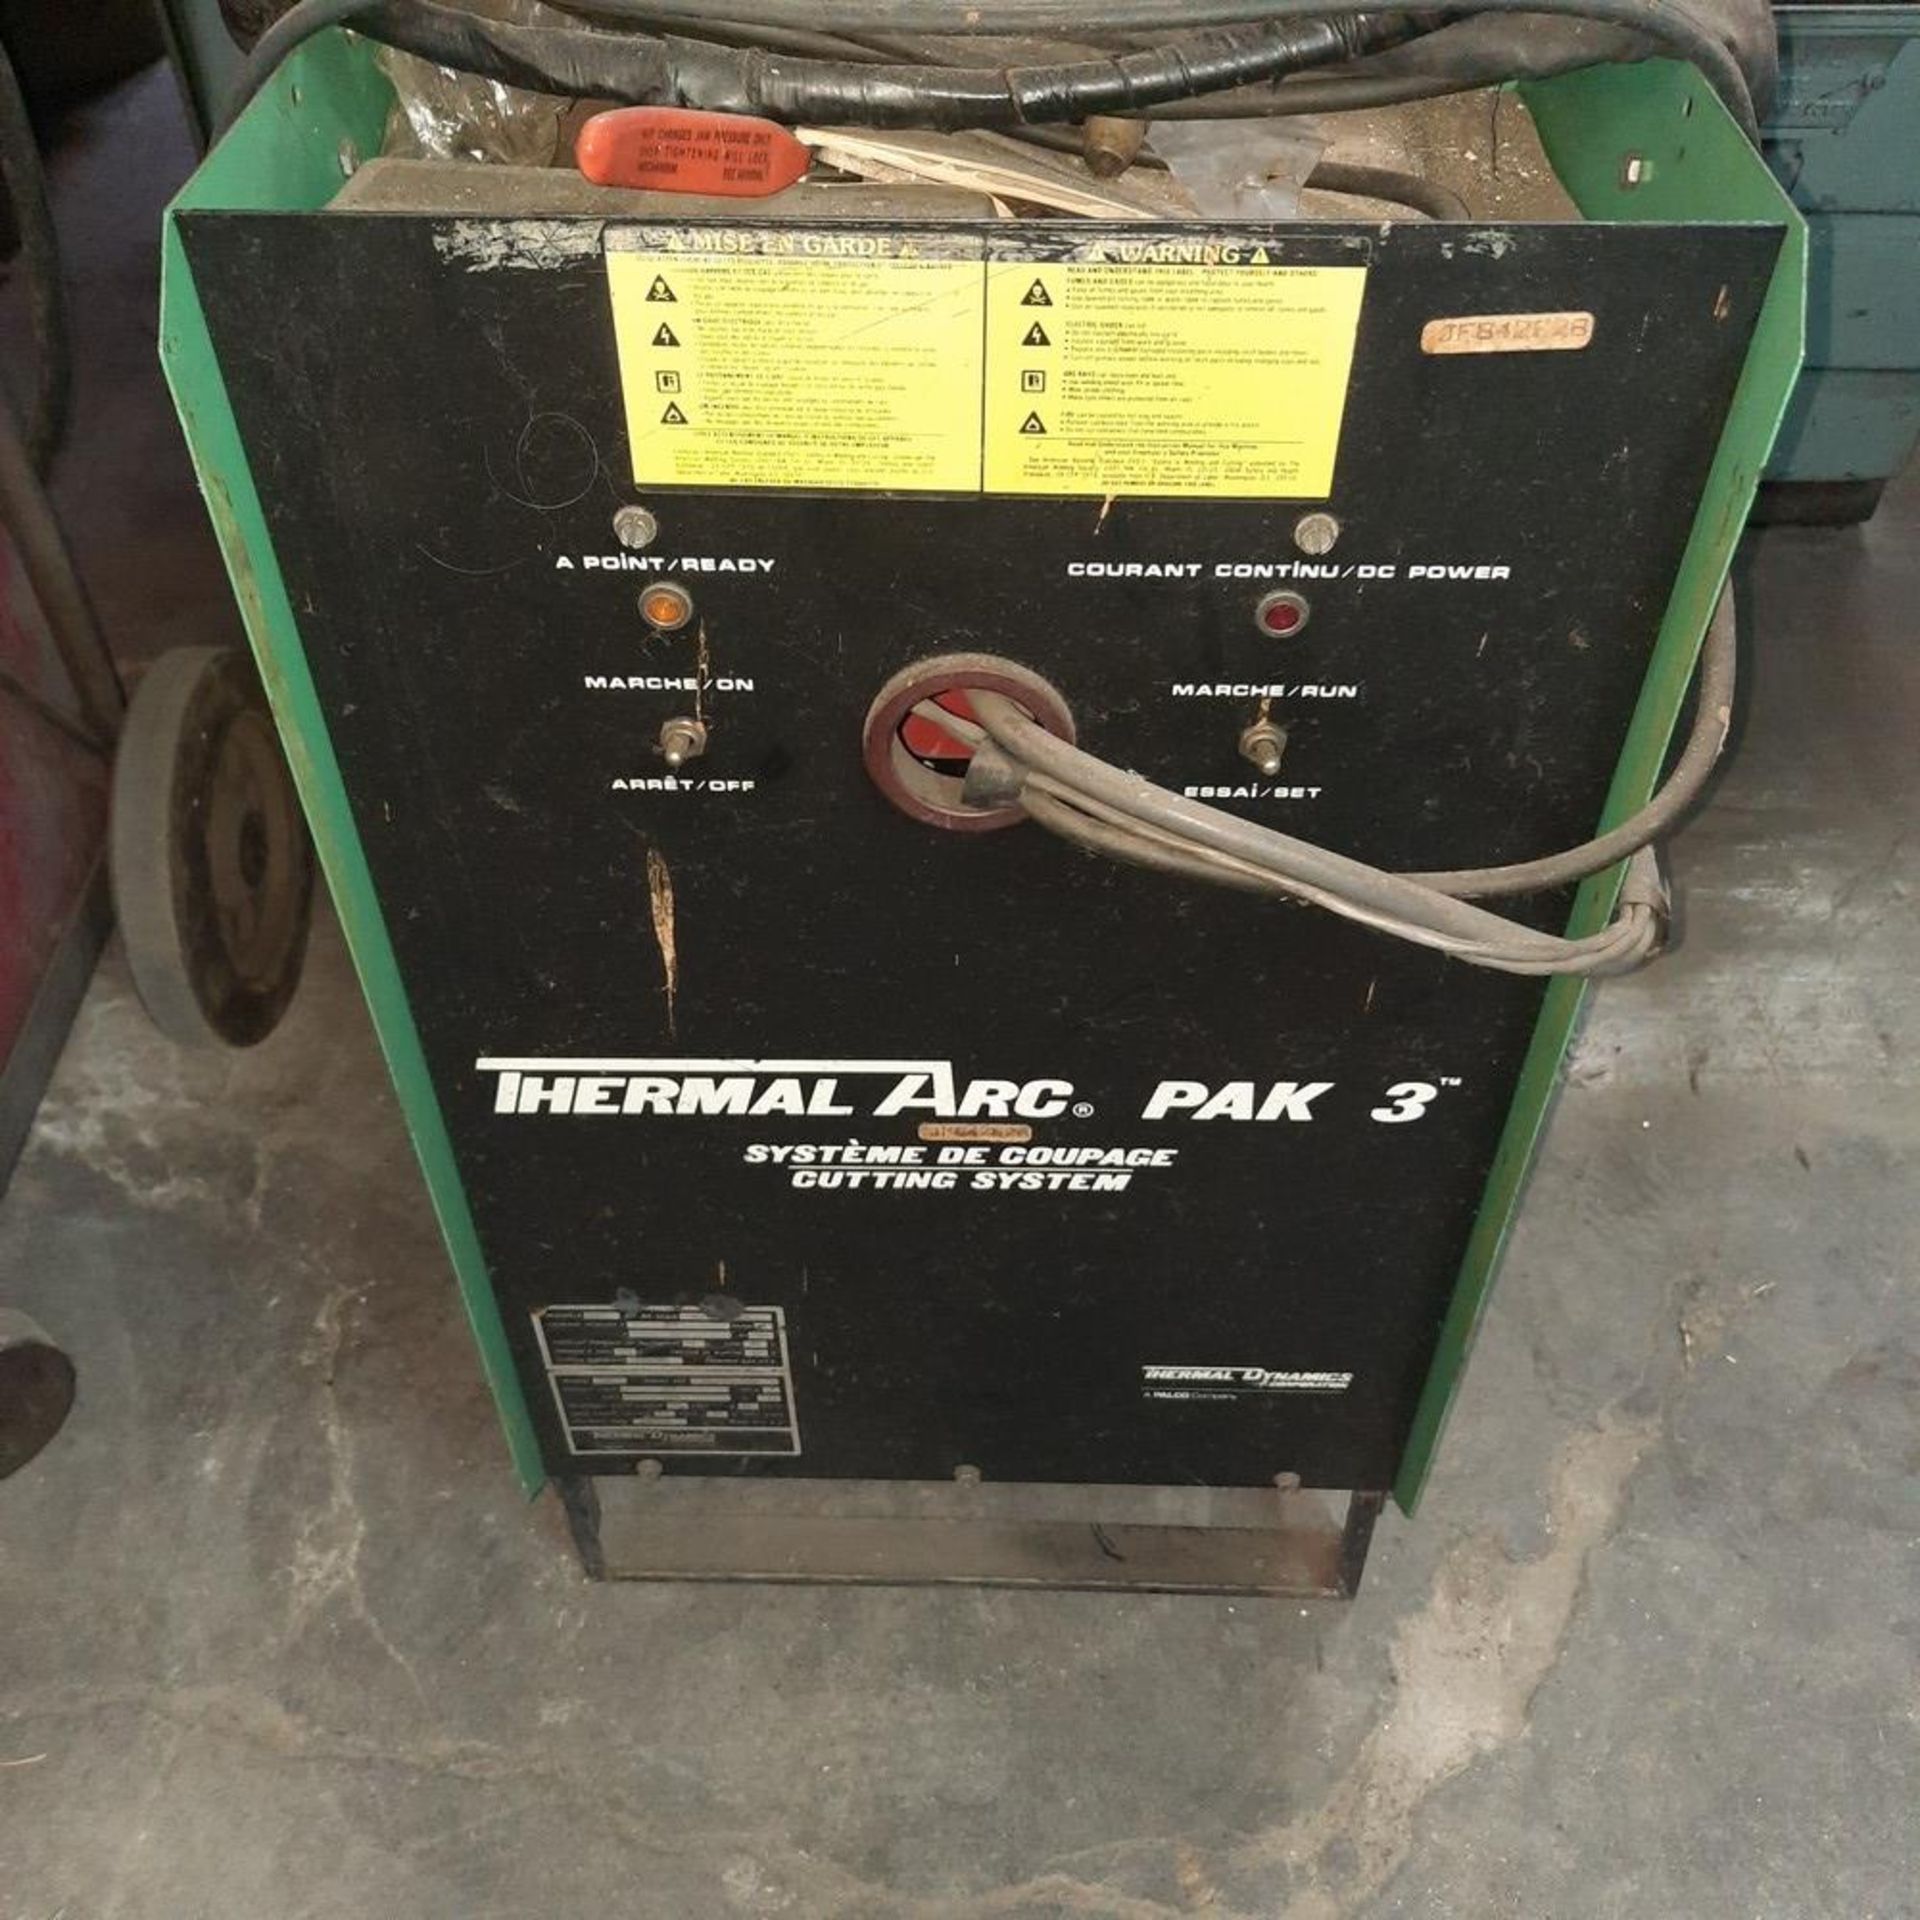 Mobile THERMAL ARC Welding Machine, c/w Access. - Image 3 of 4